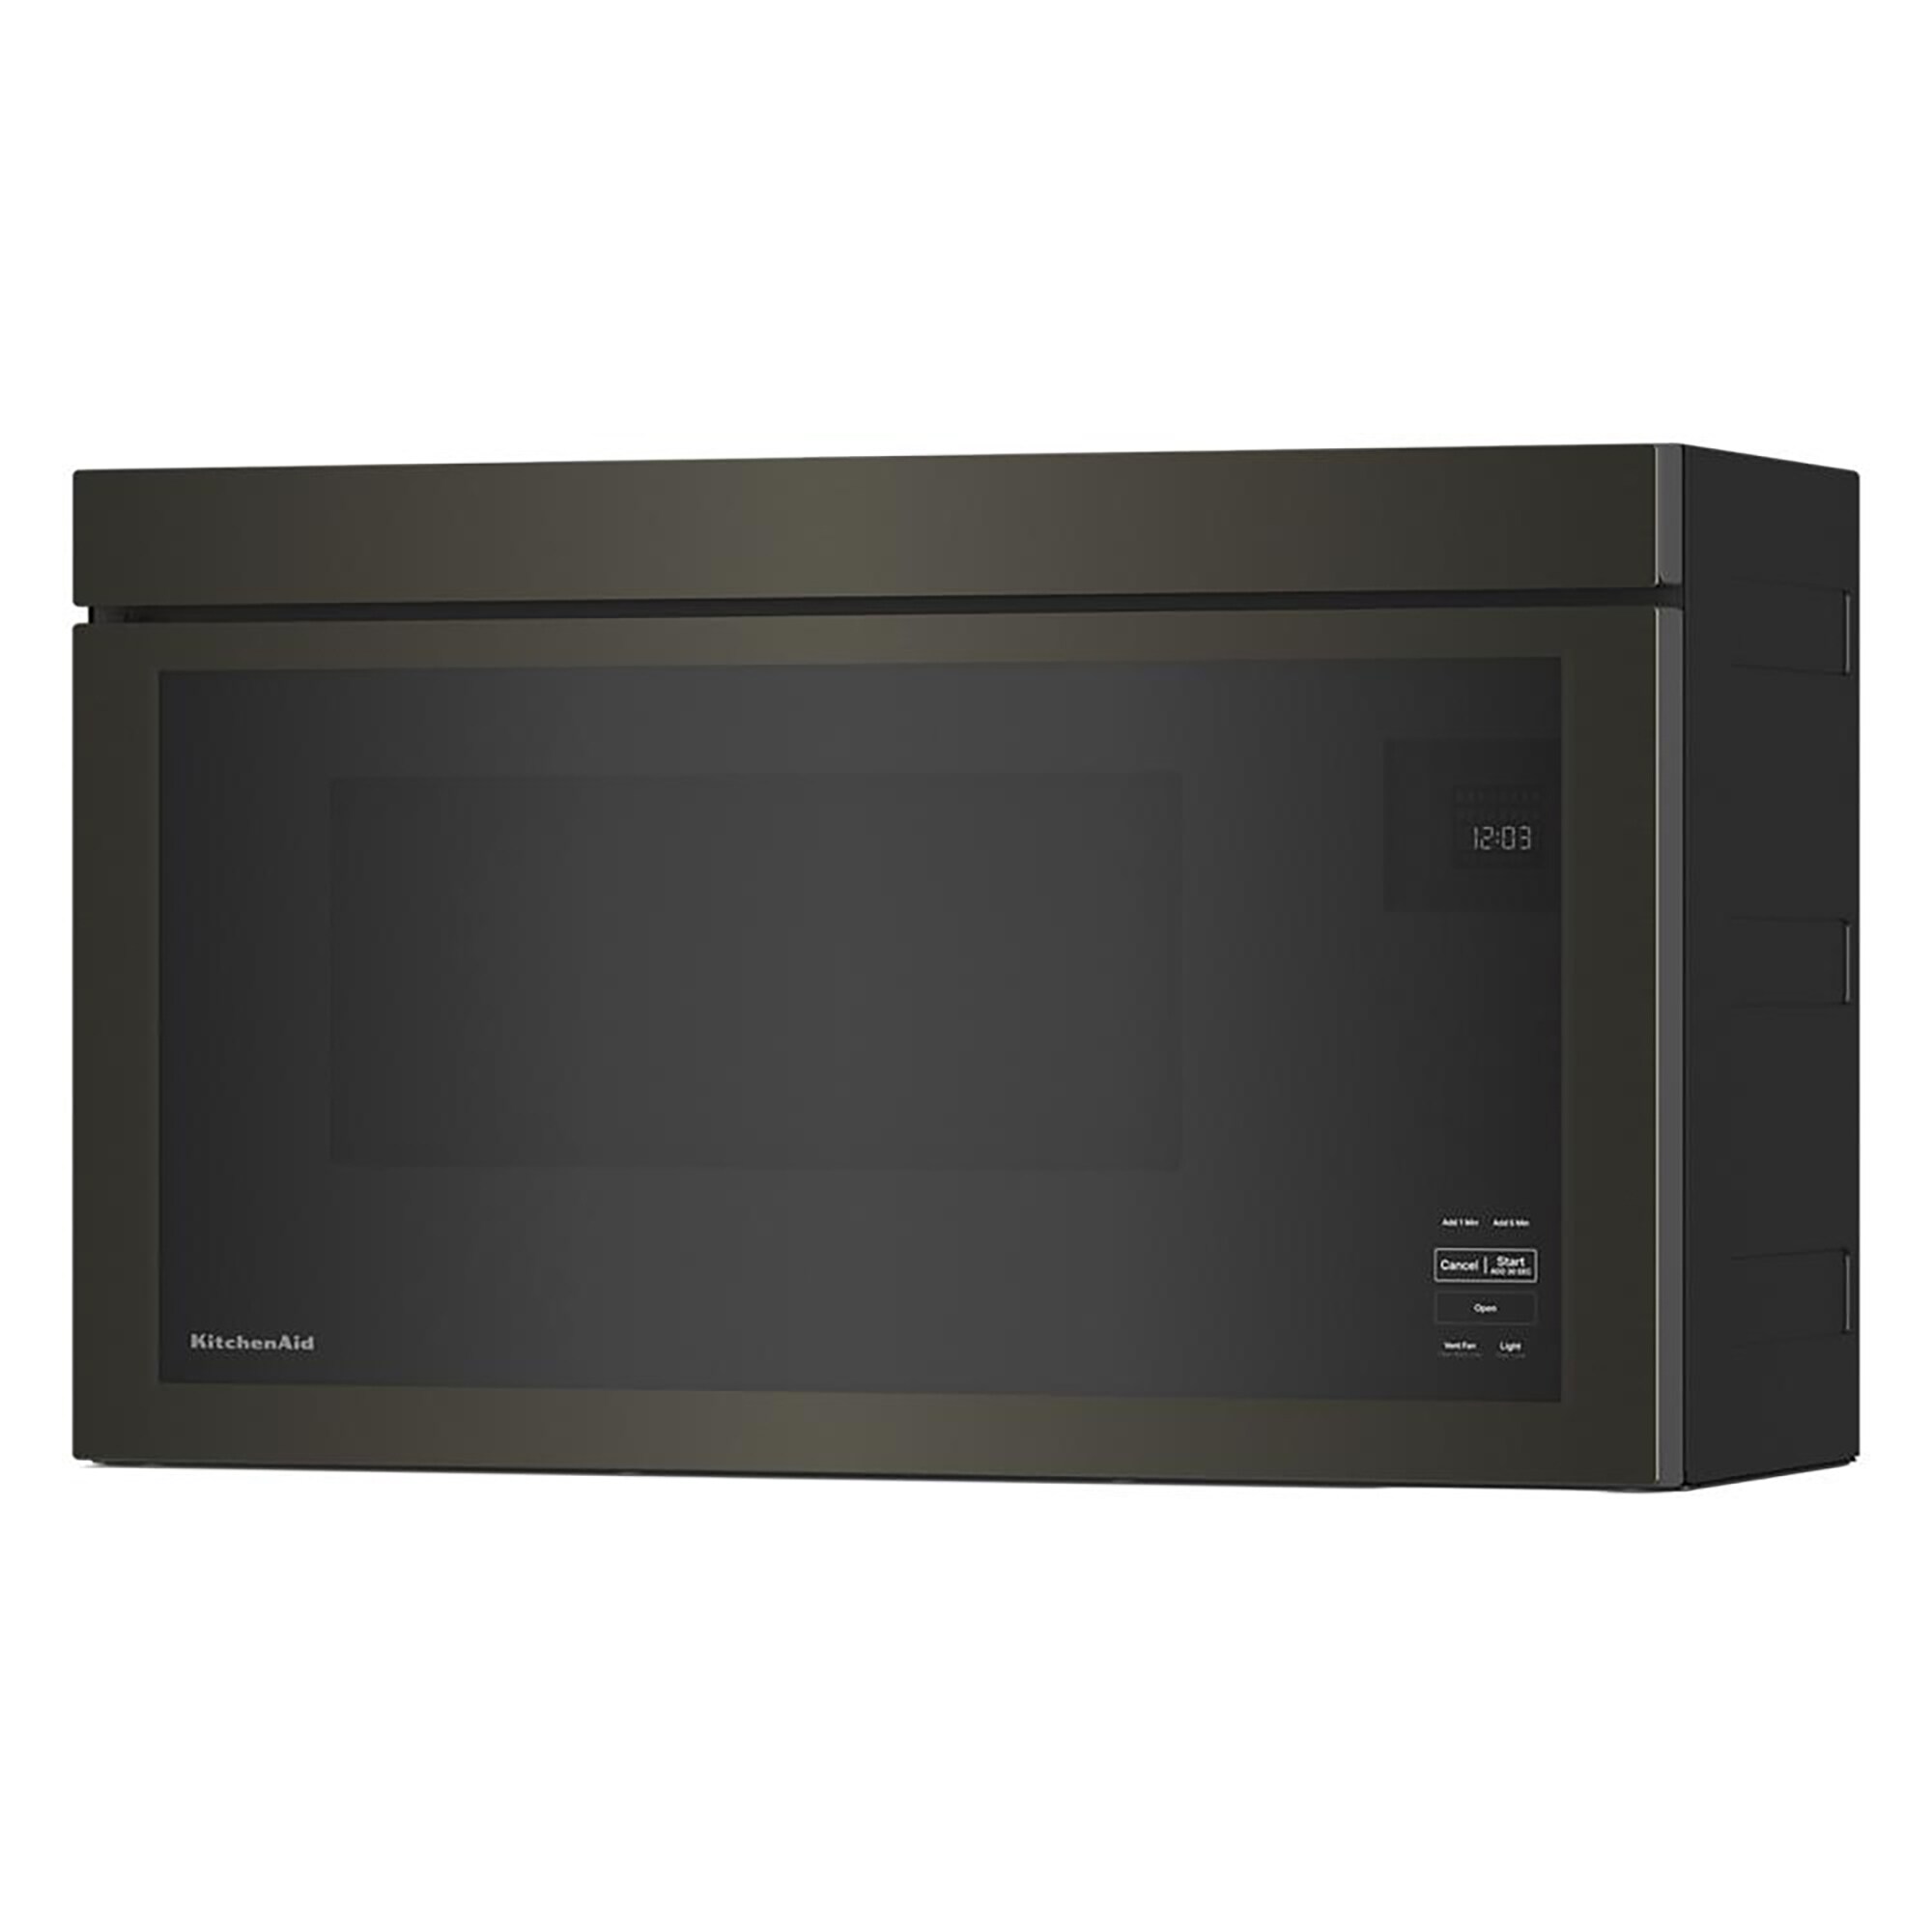 KitchenAid 22 in. 1.5 cu.ft Countertop Microwave with 10 Power Levels &  Sensor Cooking Controls - Black Stainless Steel with PrintShield Finish